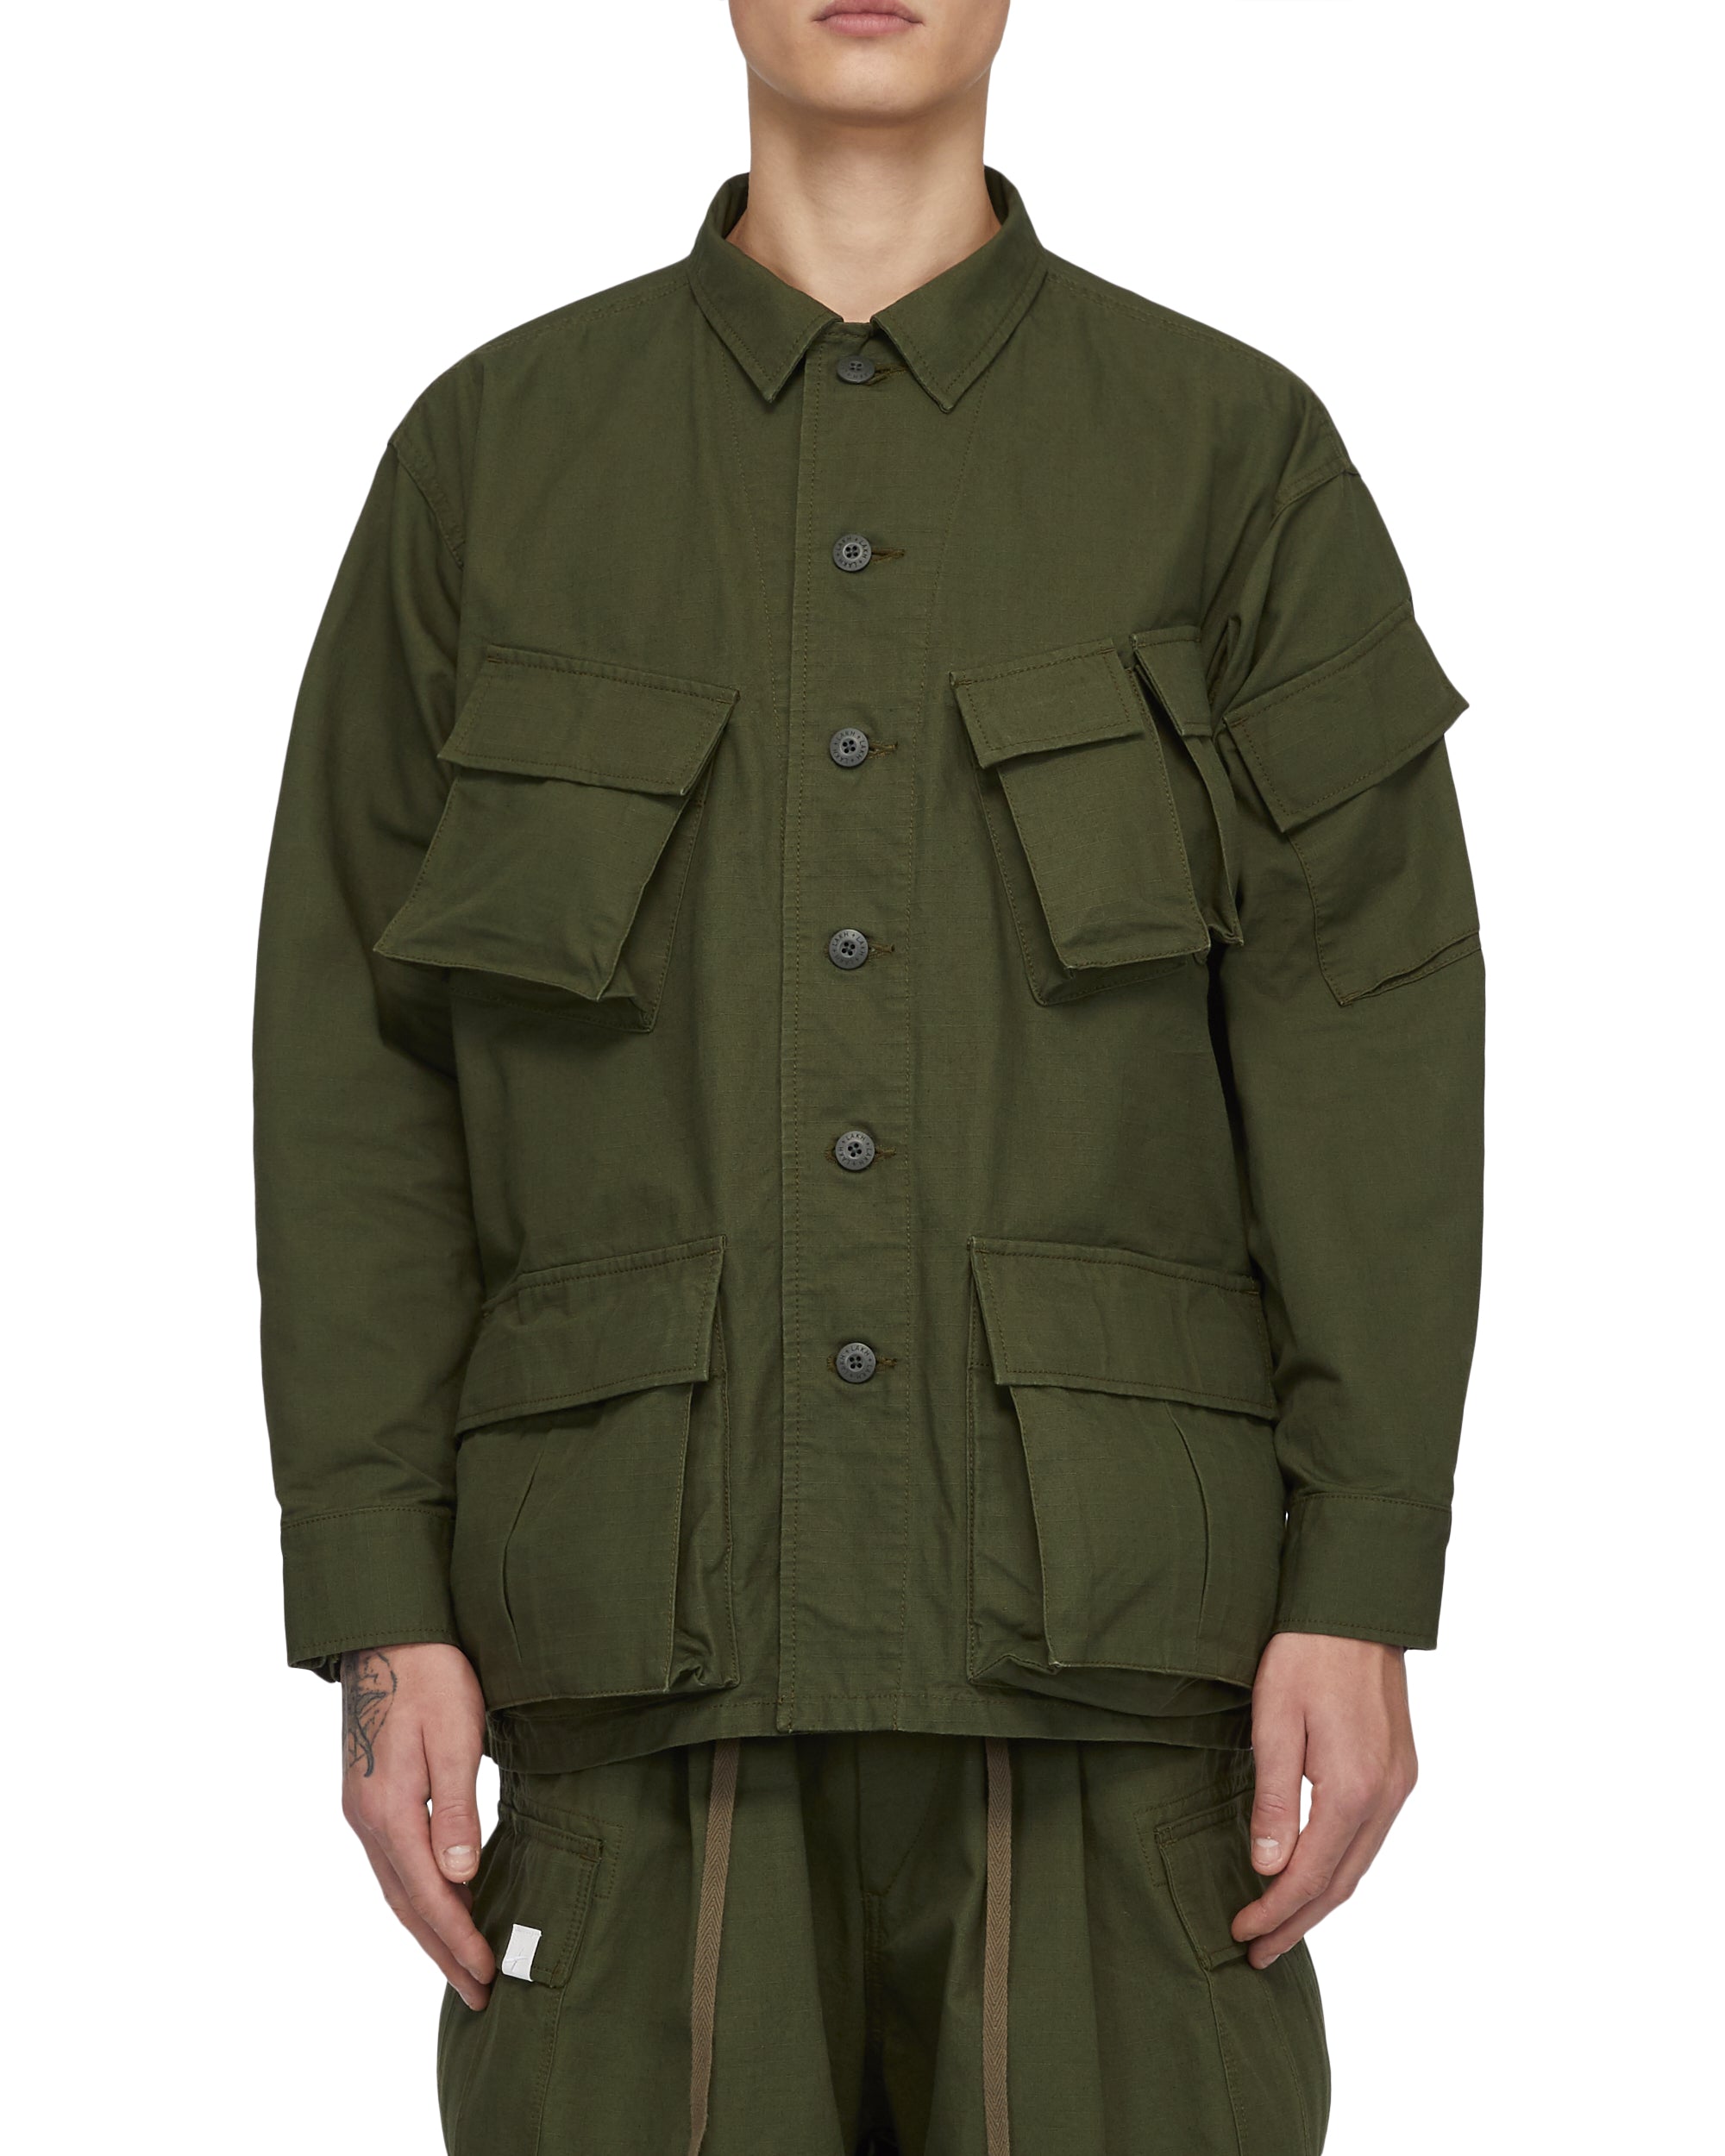 Modified Military Shirt - Olive